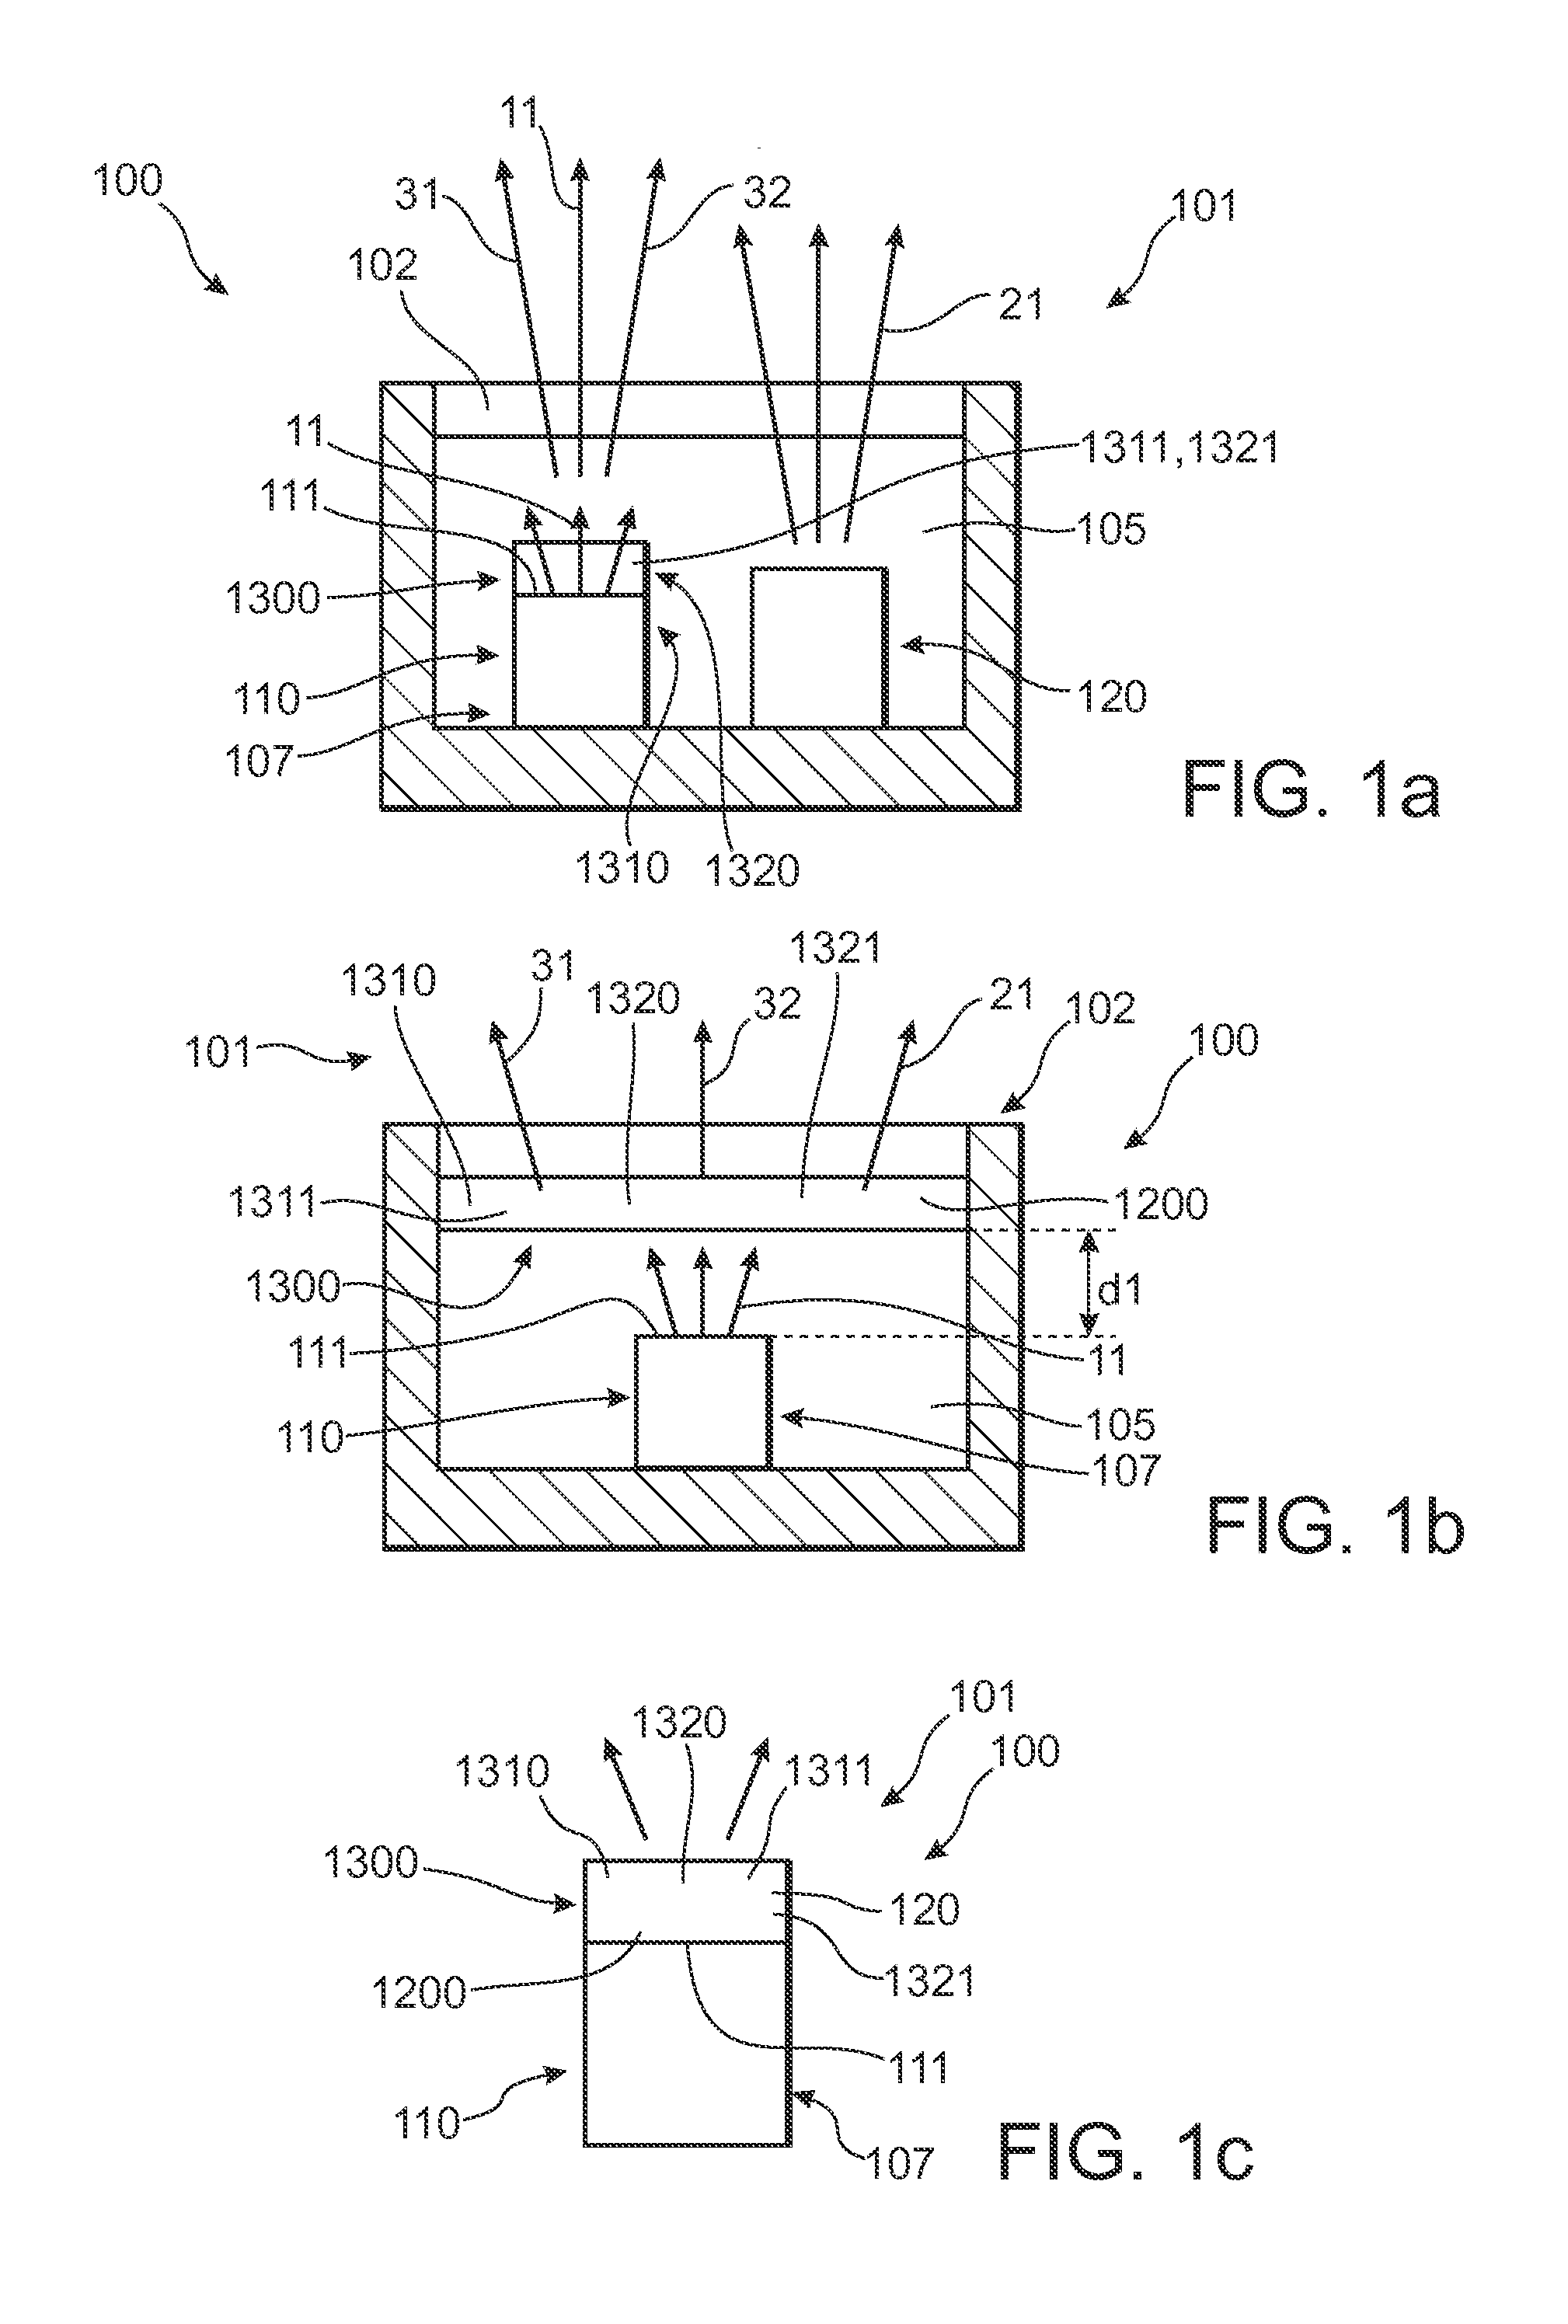 LED based device with wide color gamut